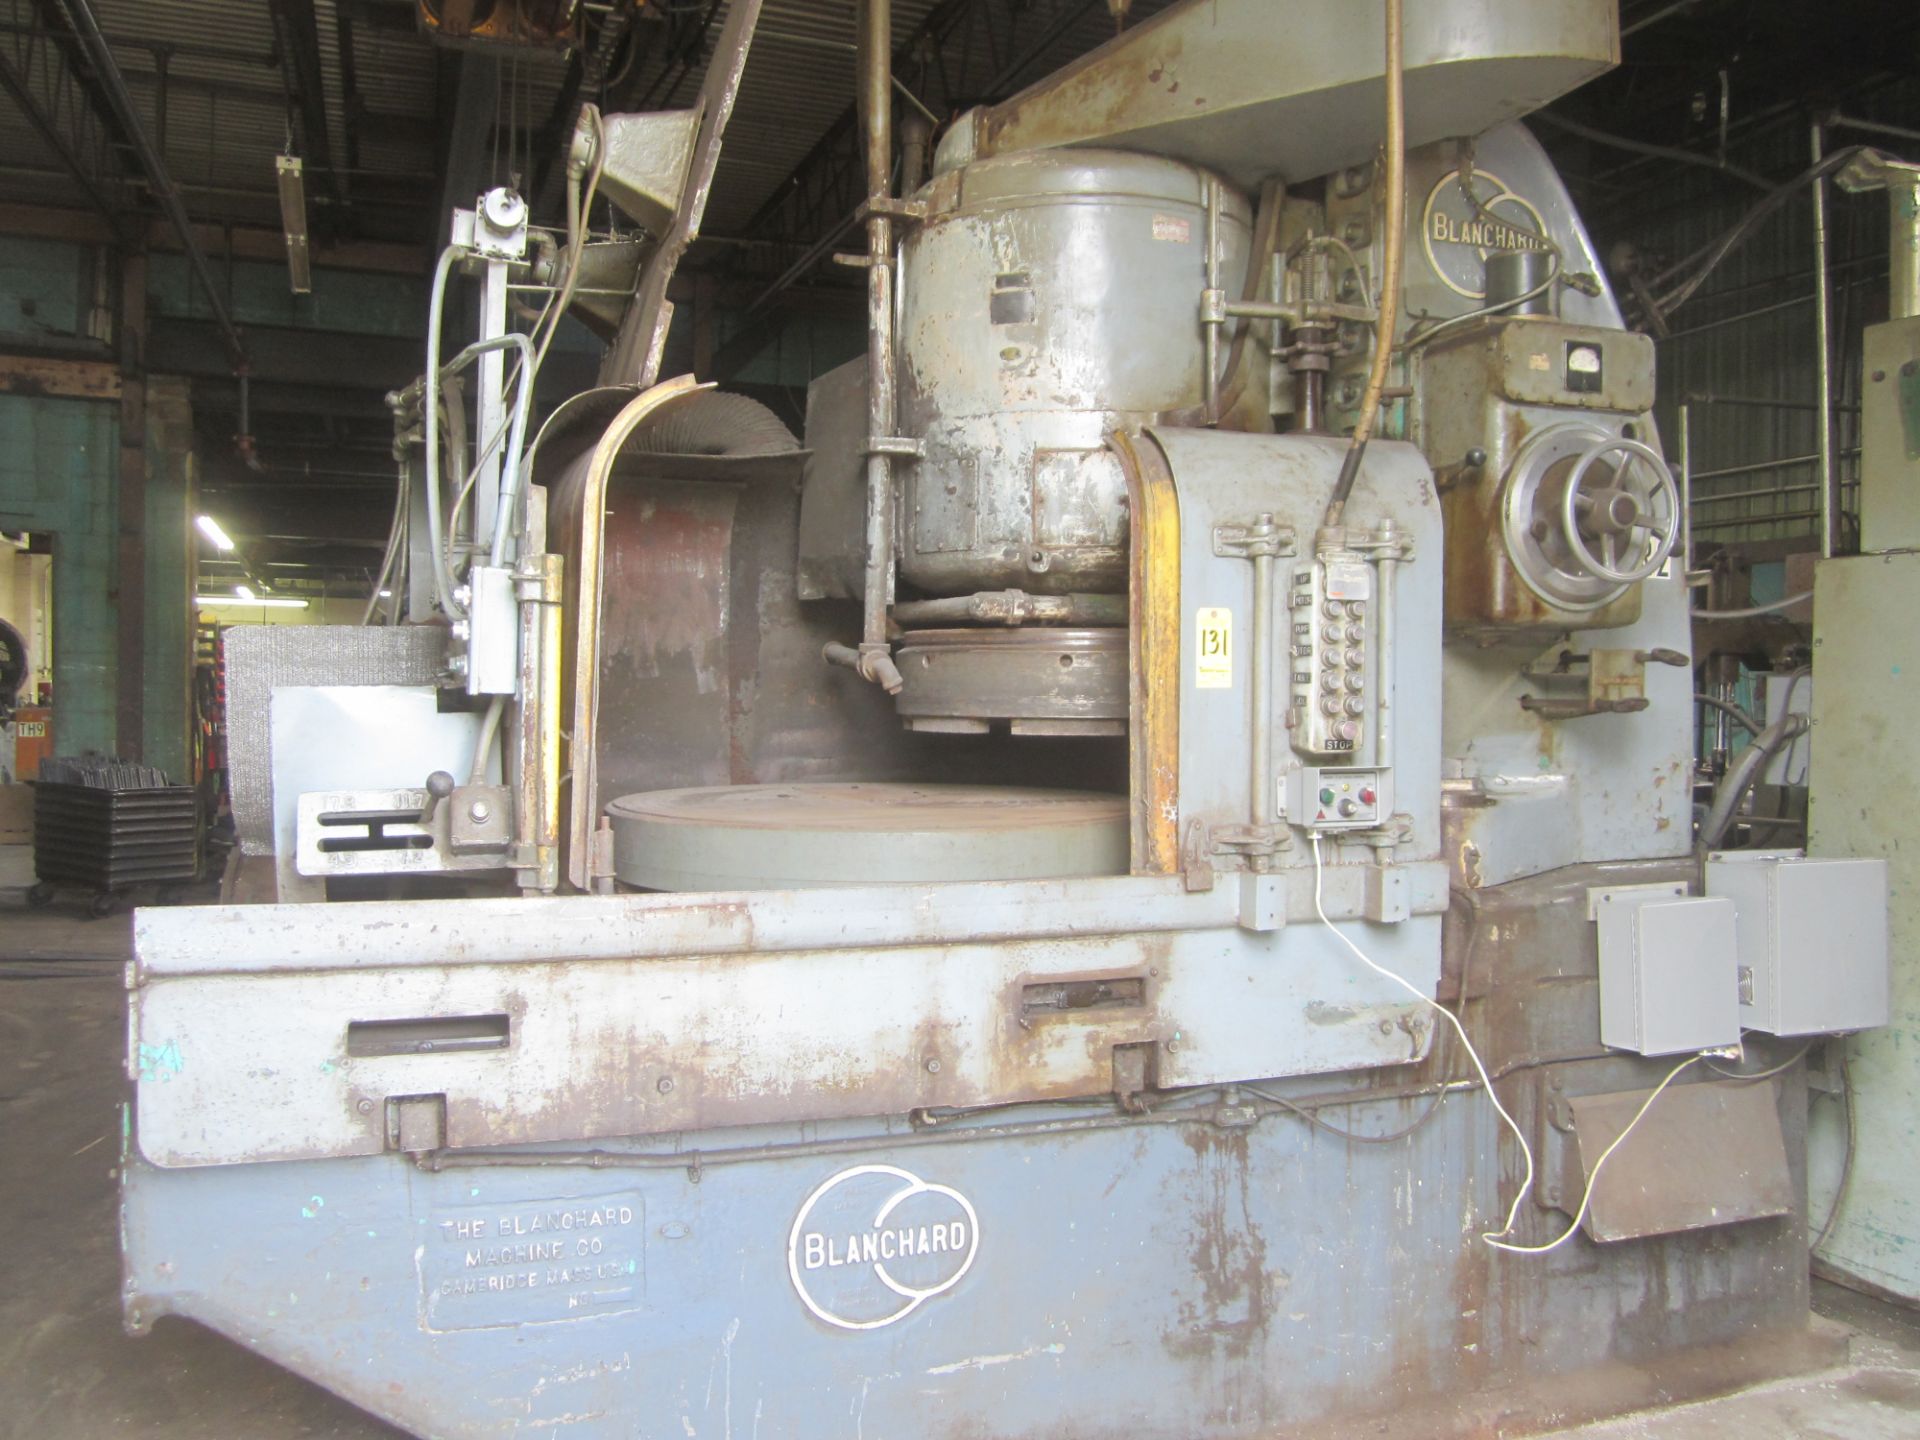 Blanchard 48" Rotary Surface Grinder, s/n 9802, 24" Segmented Wheel, Magnetic Chuck Recently Rebuilt - Image 2 of 15